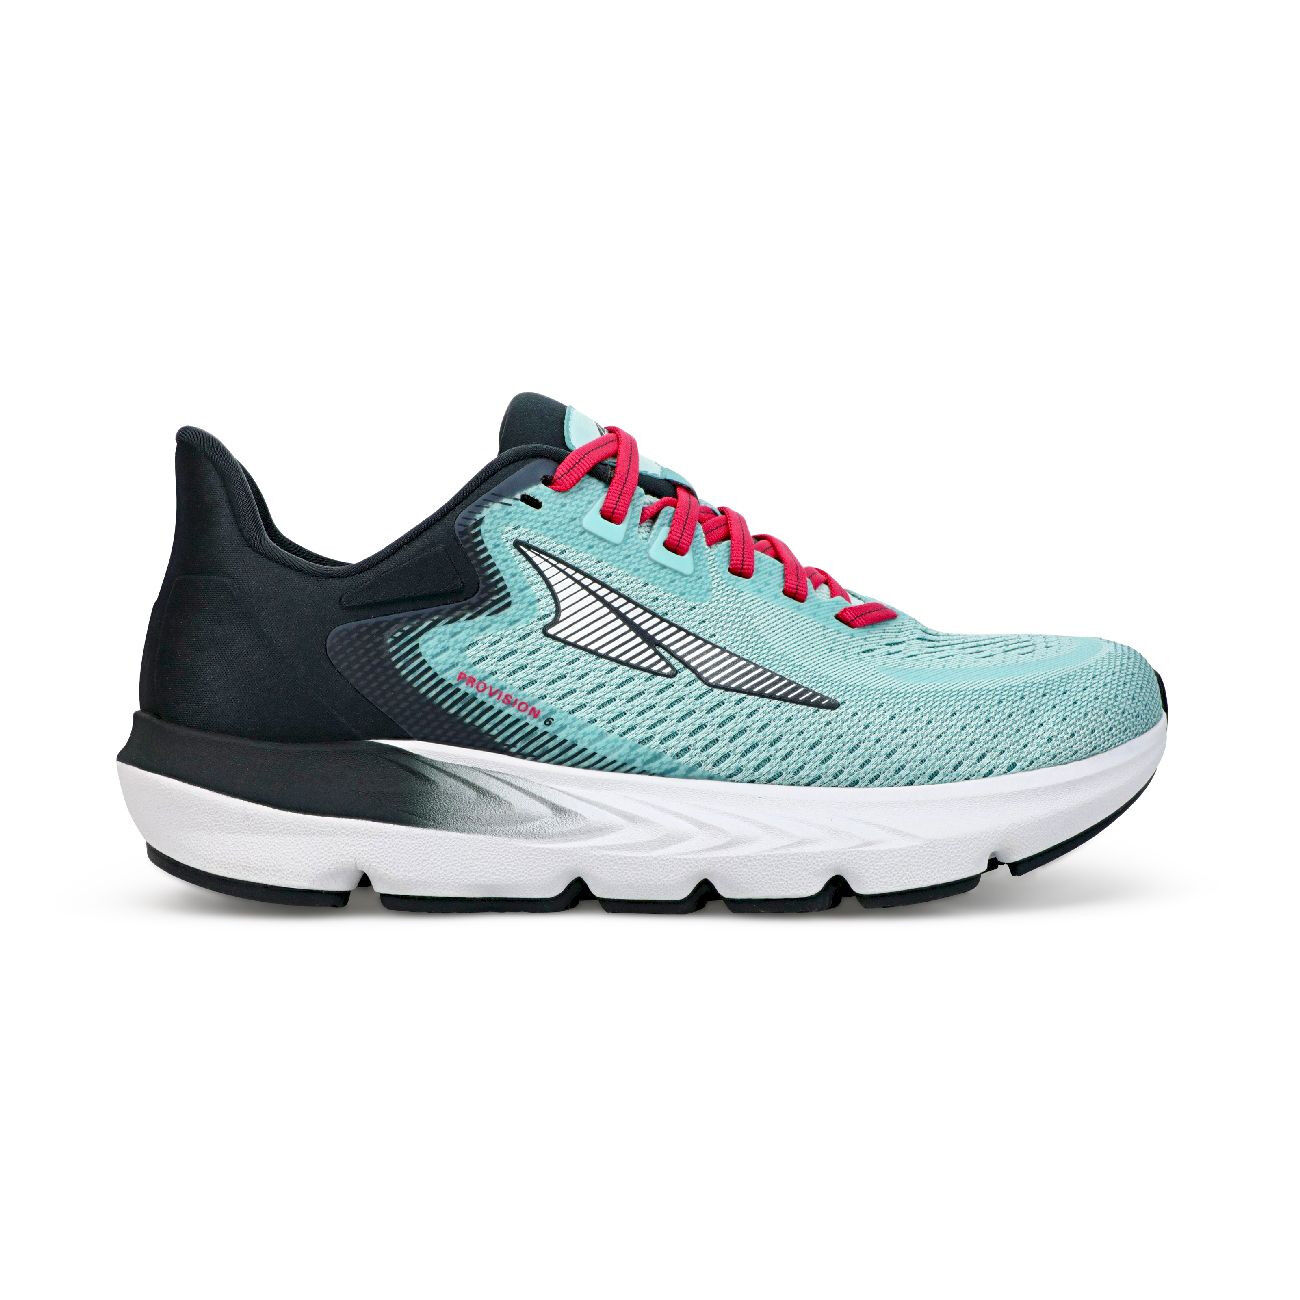 Altra Provision 6 - Running shoes - Women's